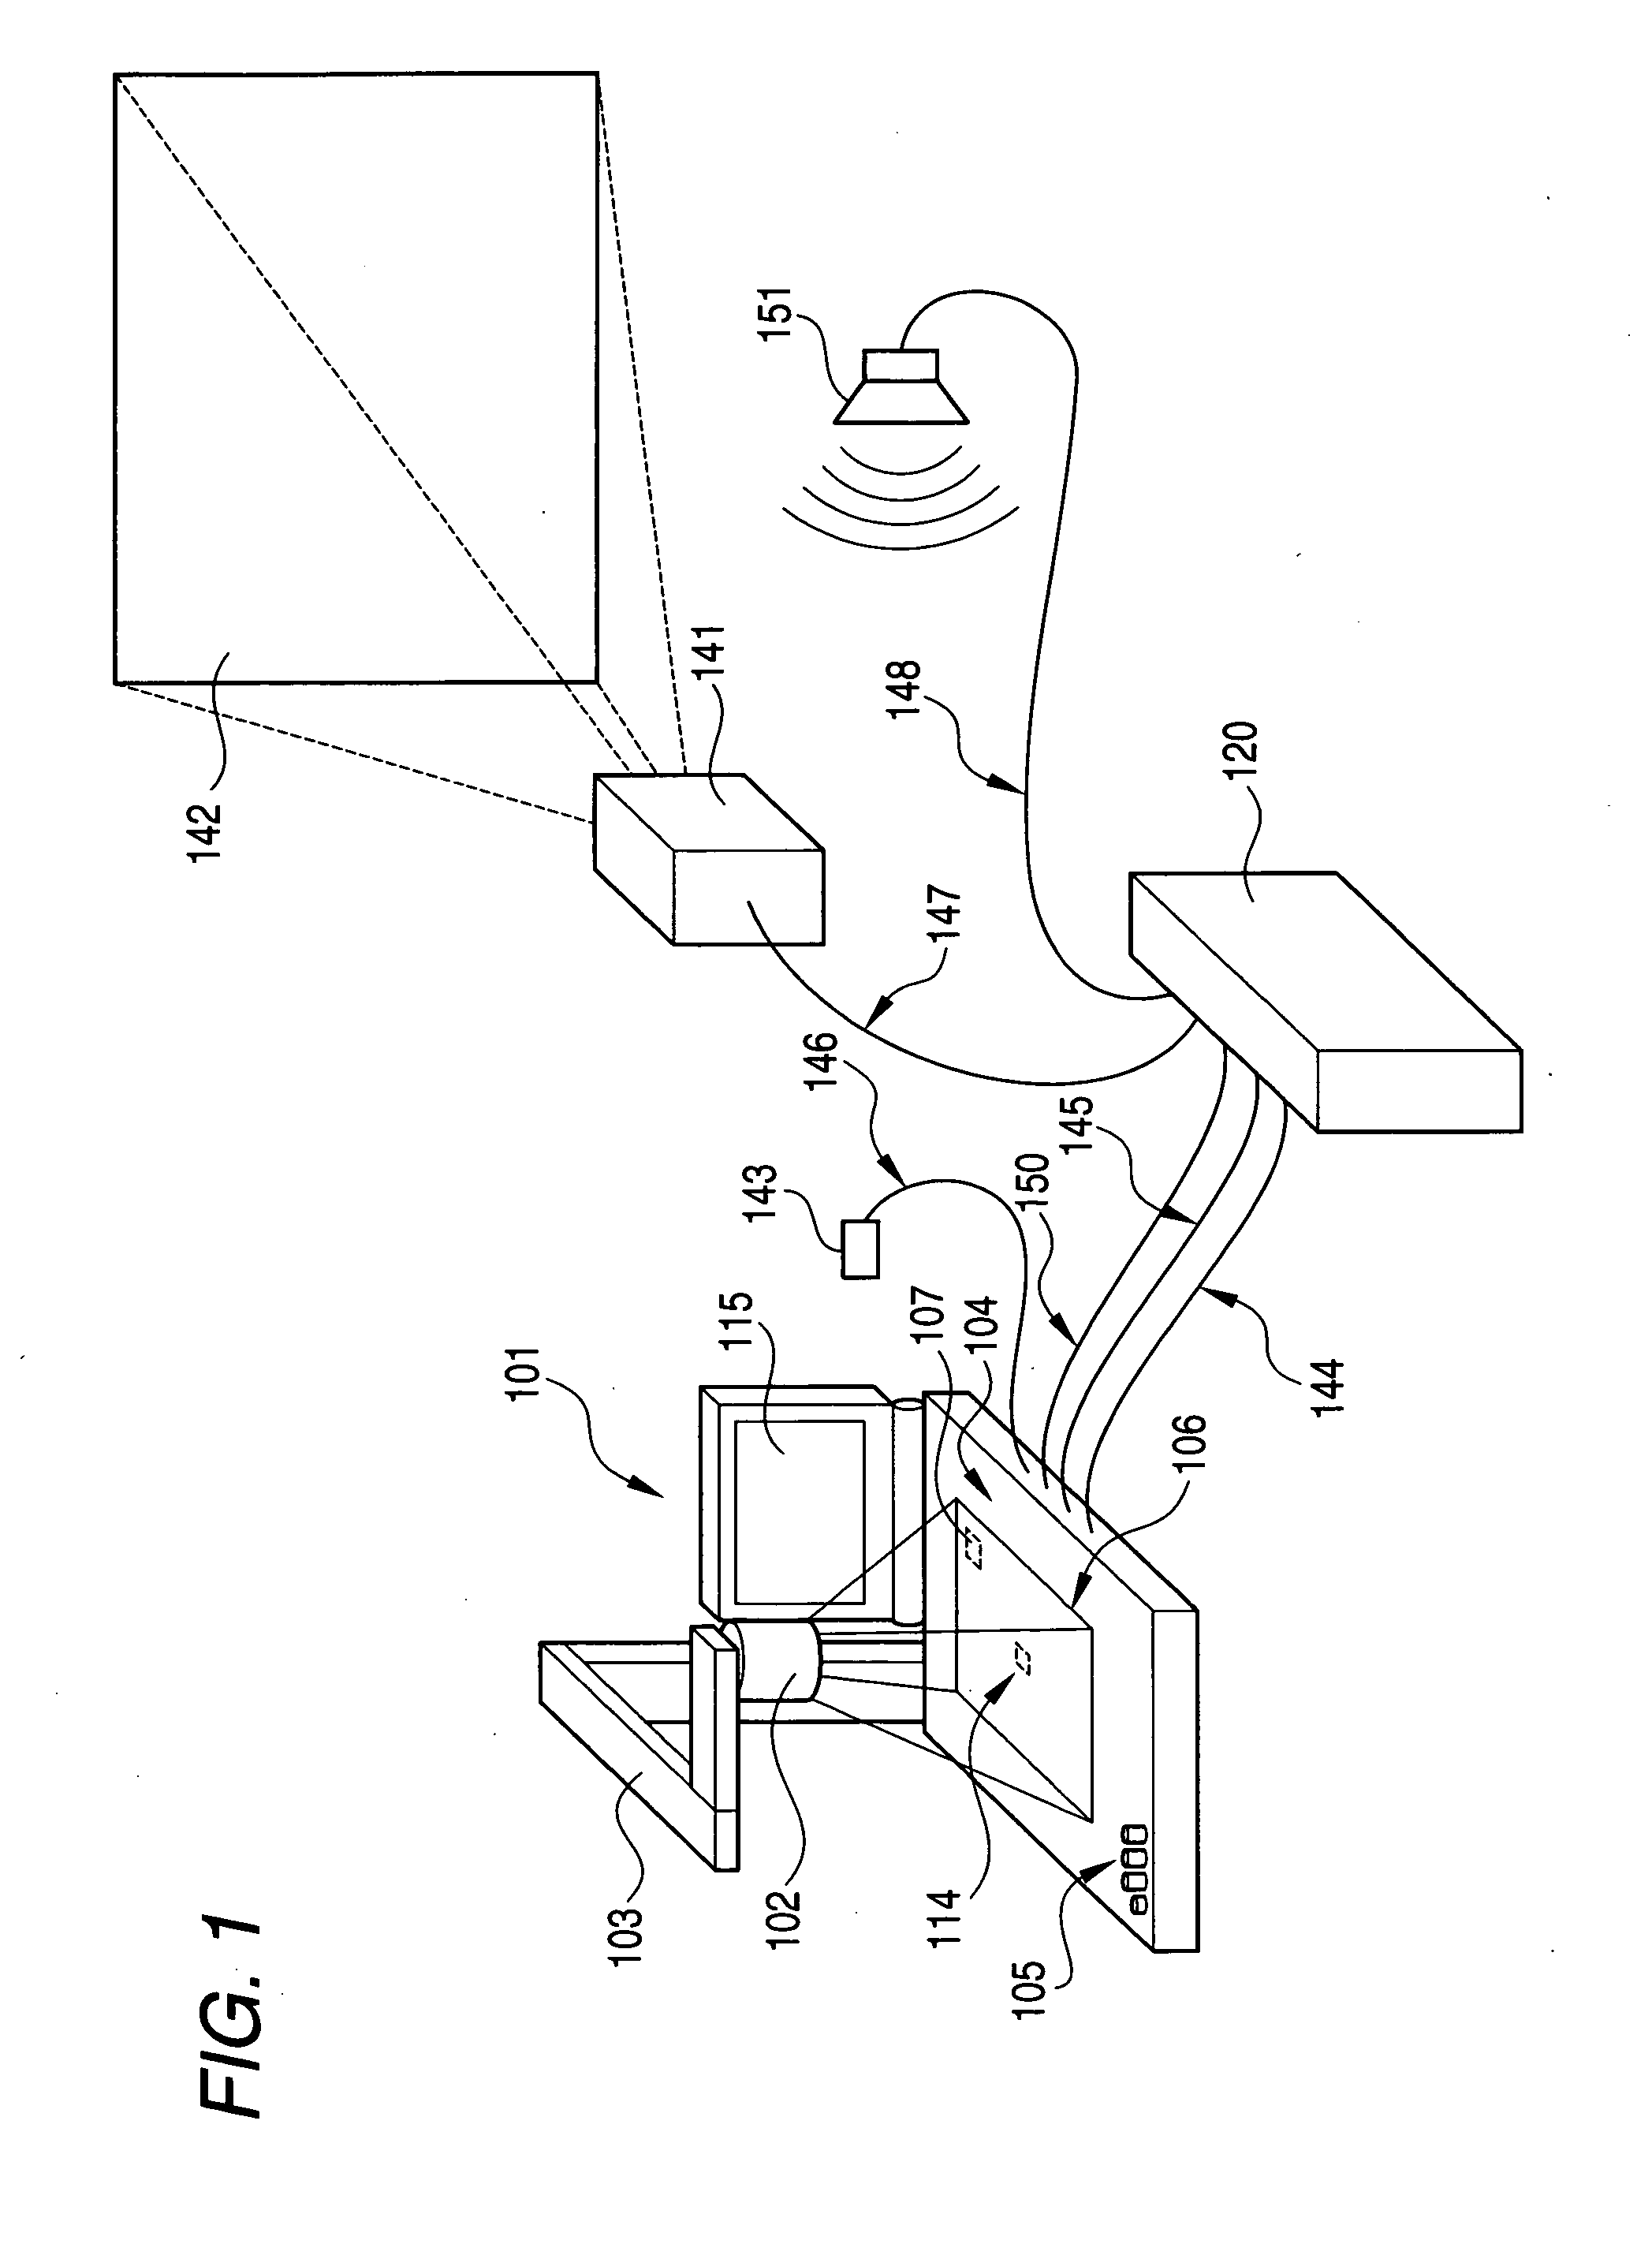 Content-producing device, output device and computer-readable medium